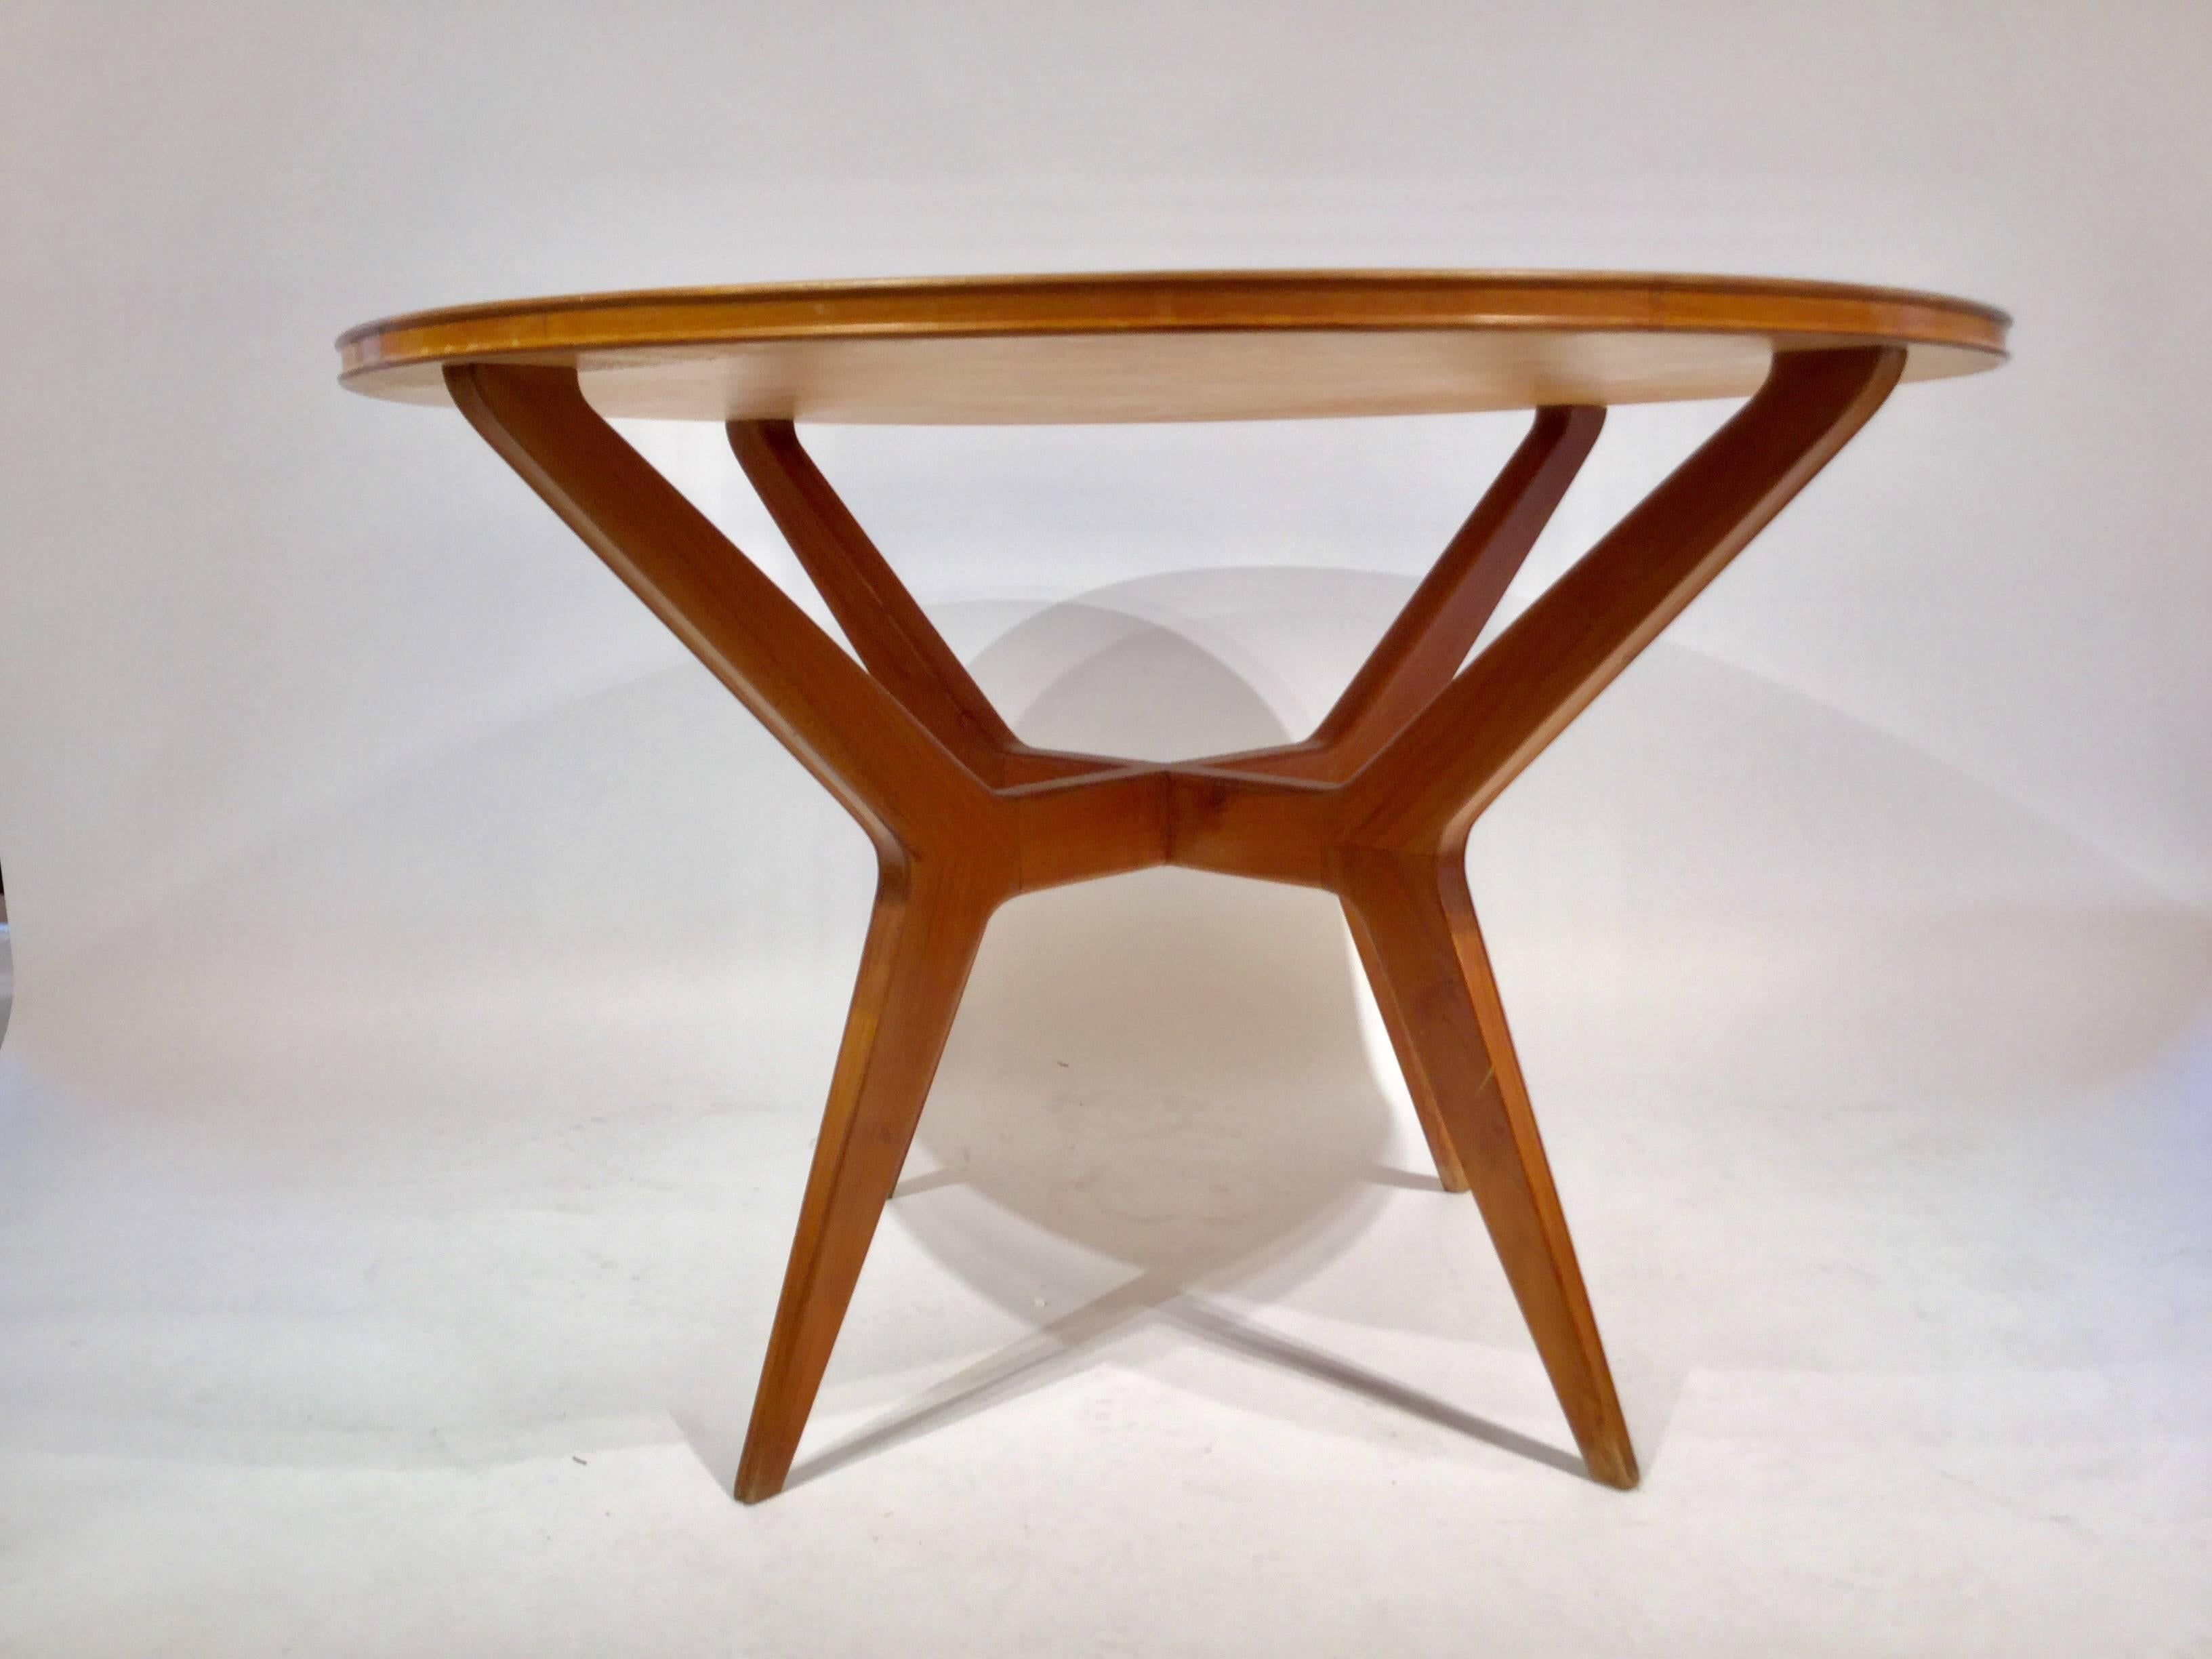 An Italian designed dining table in light walnut with inlaid glass top on sculptural legs attributed to Ico Parisi, circa 1950.